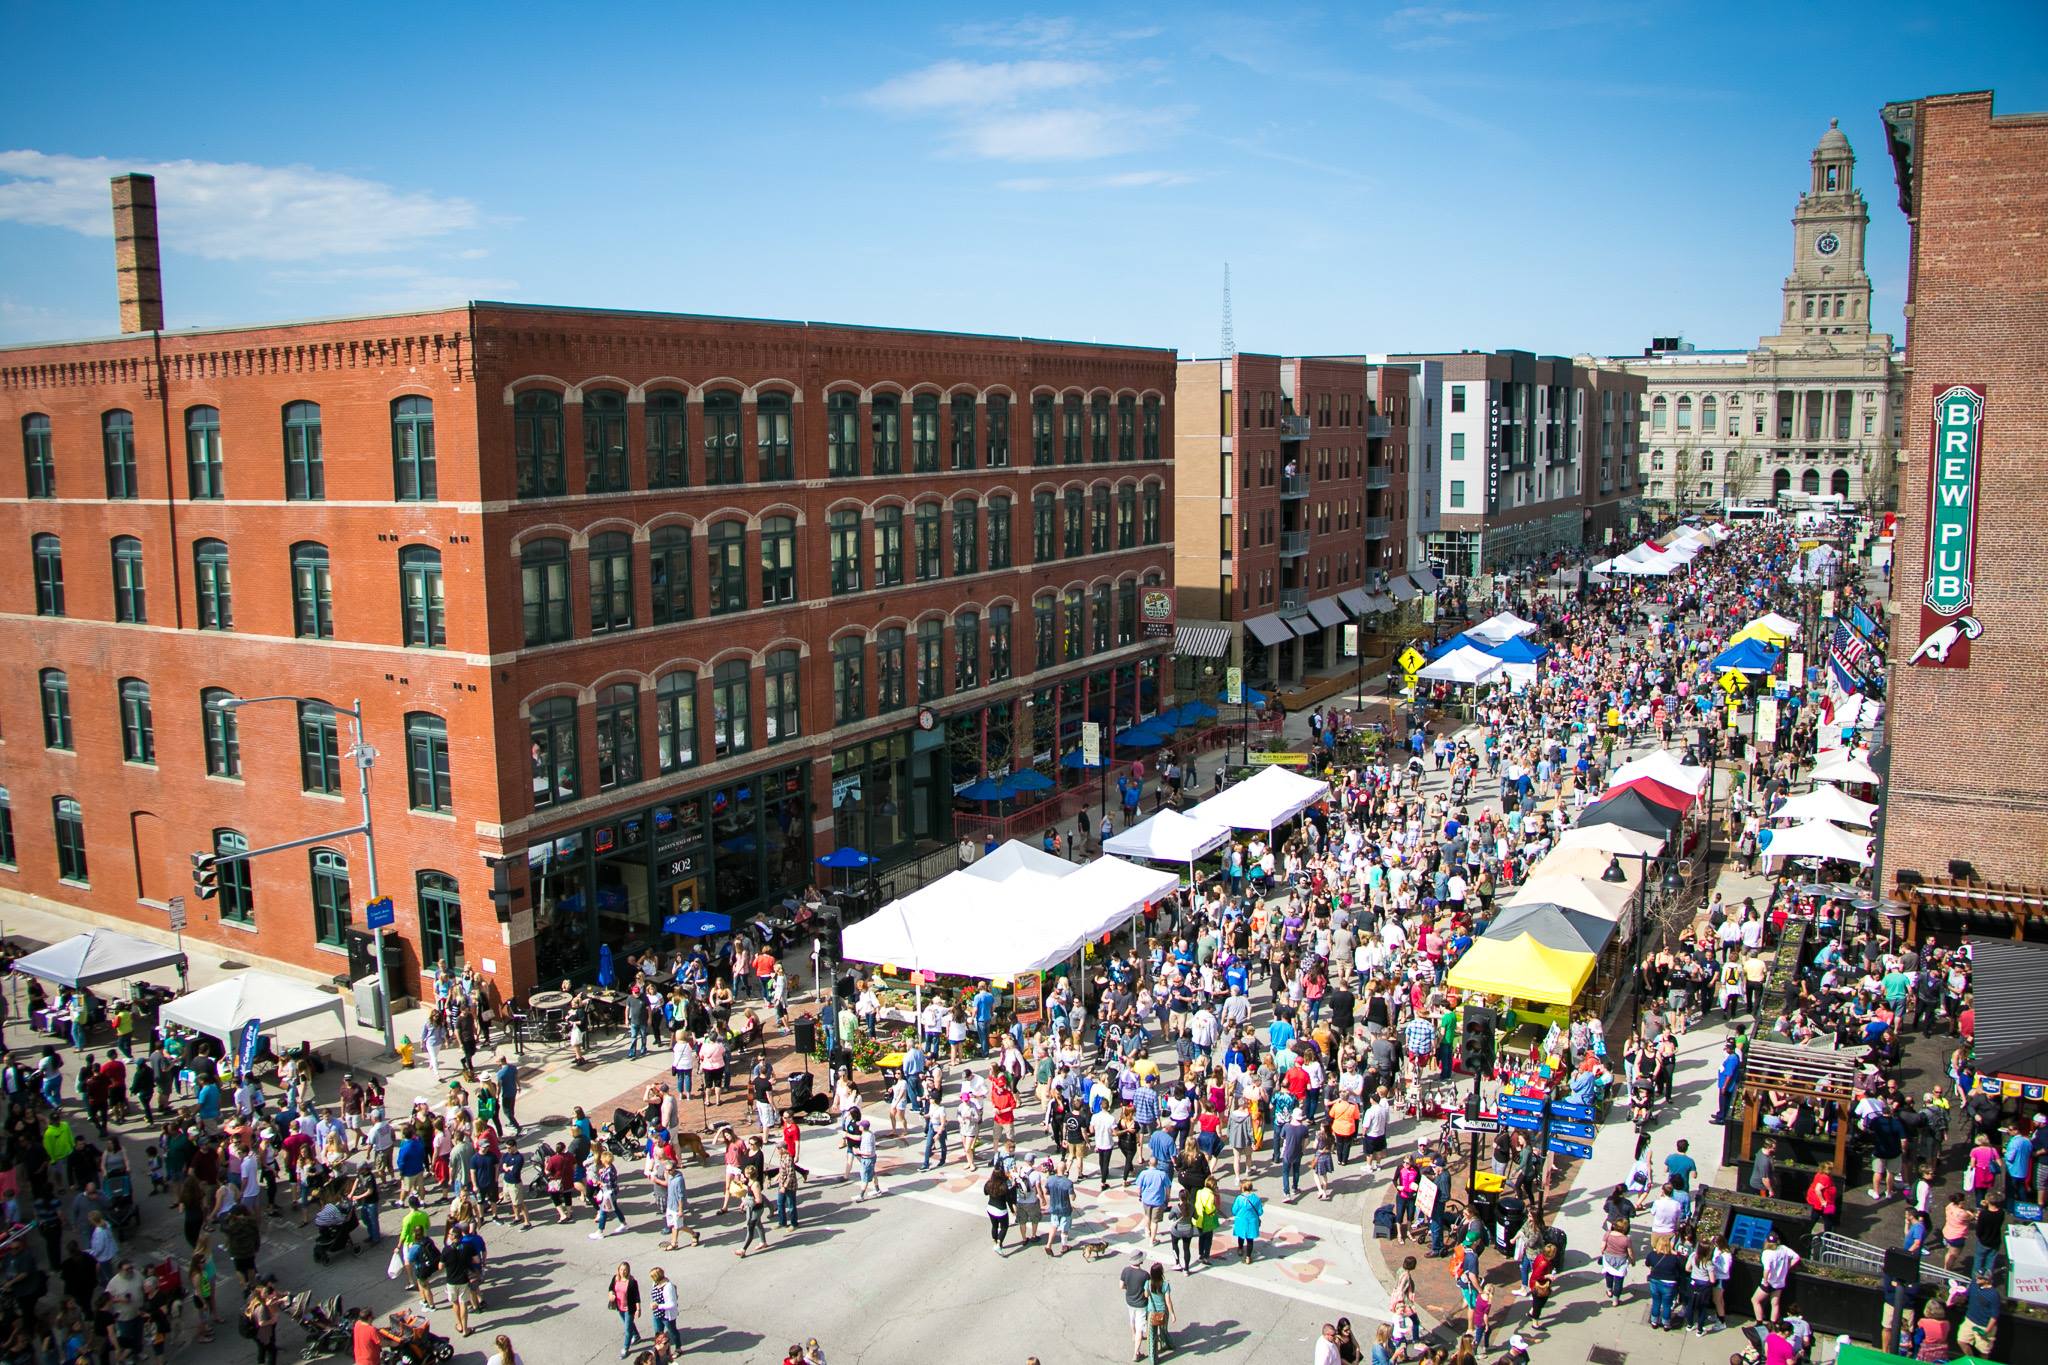 things to do in Iowa - Des Moines Farmers' Market